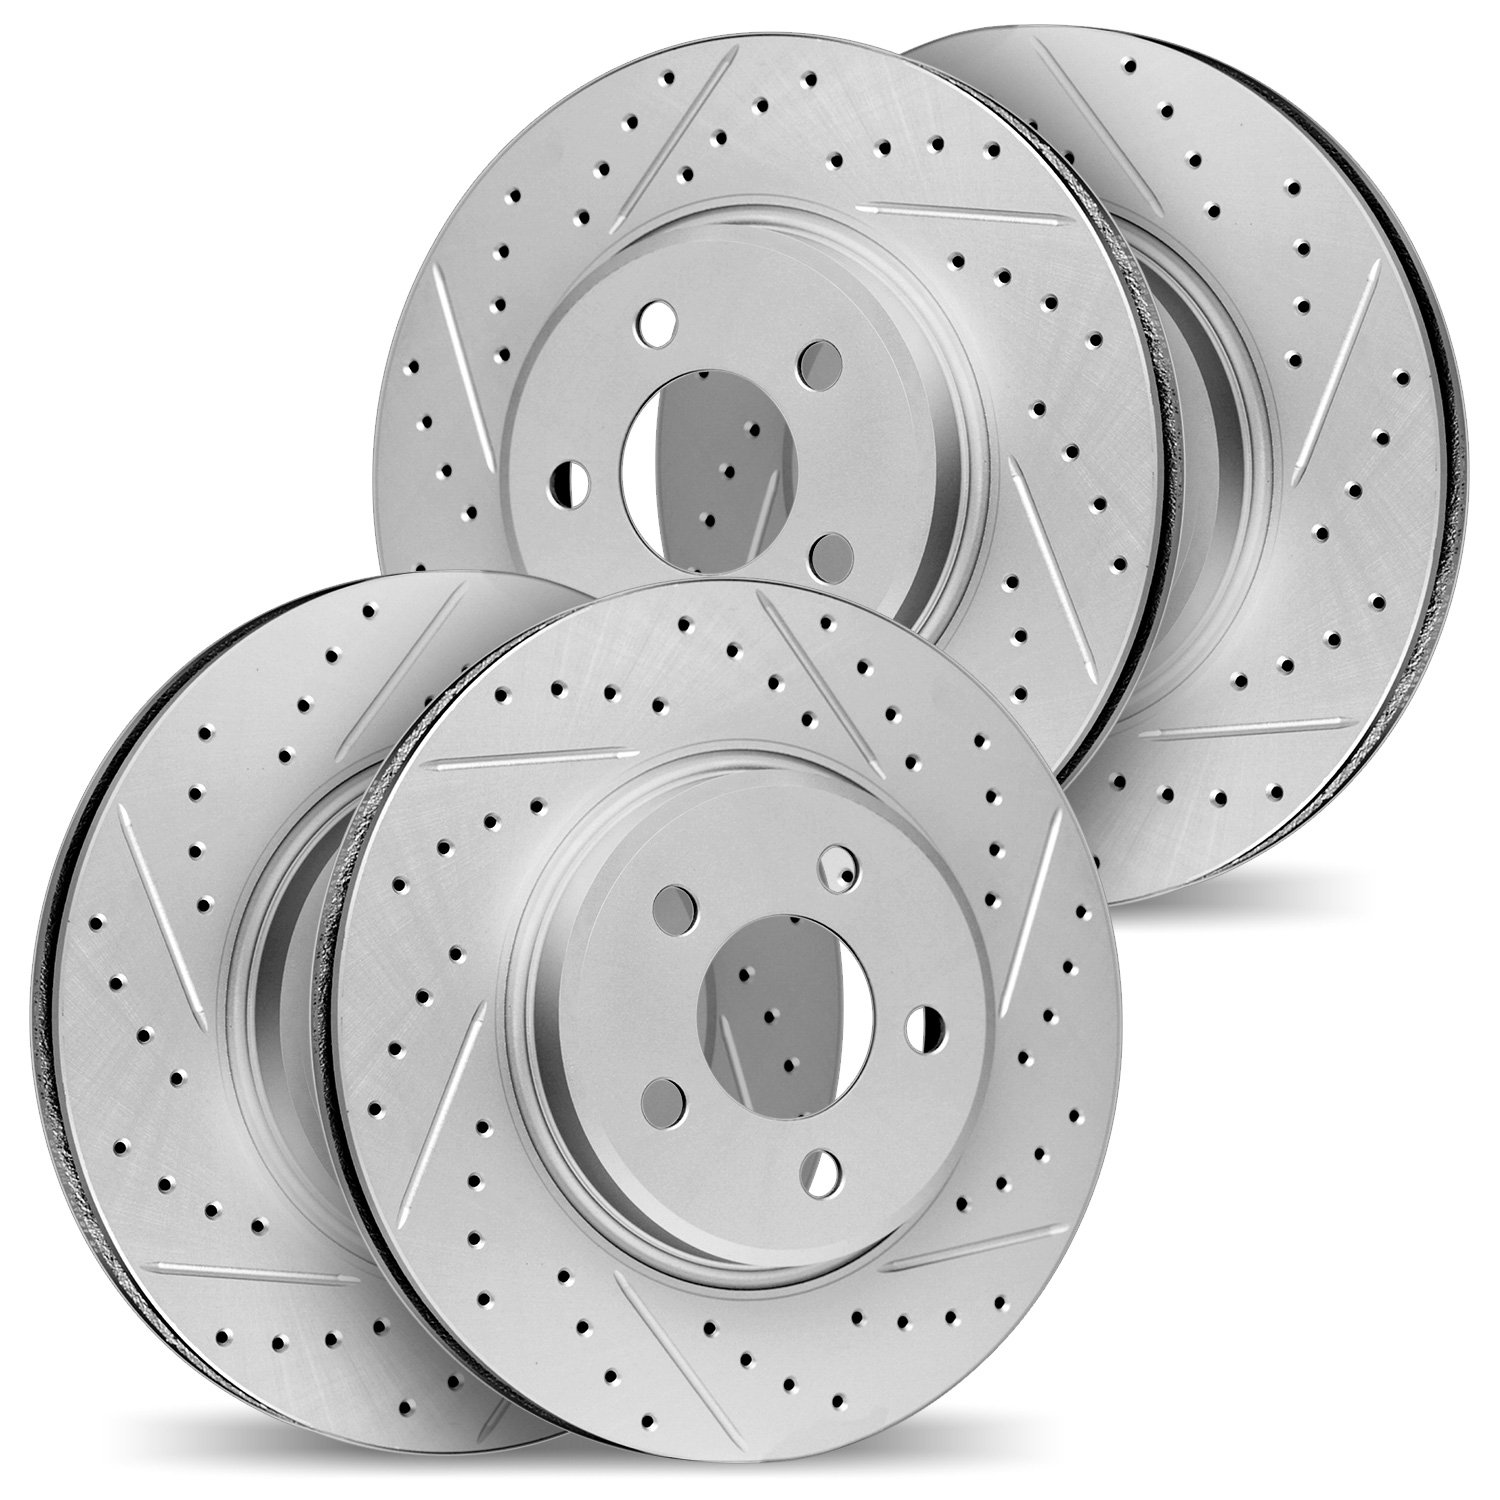 2004-31067 Geoperformance Drilled/Slotted Brake Rotors, 2007-2018 BMW, Position: Front and Rear